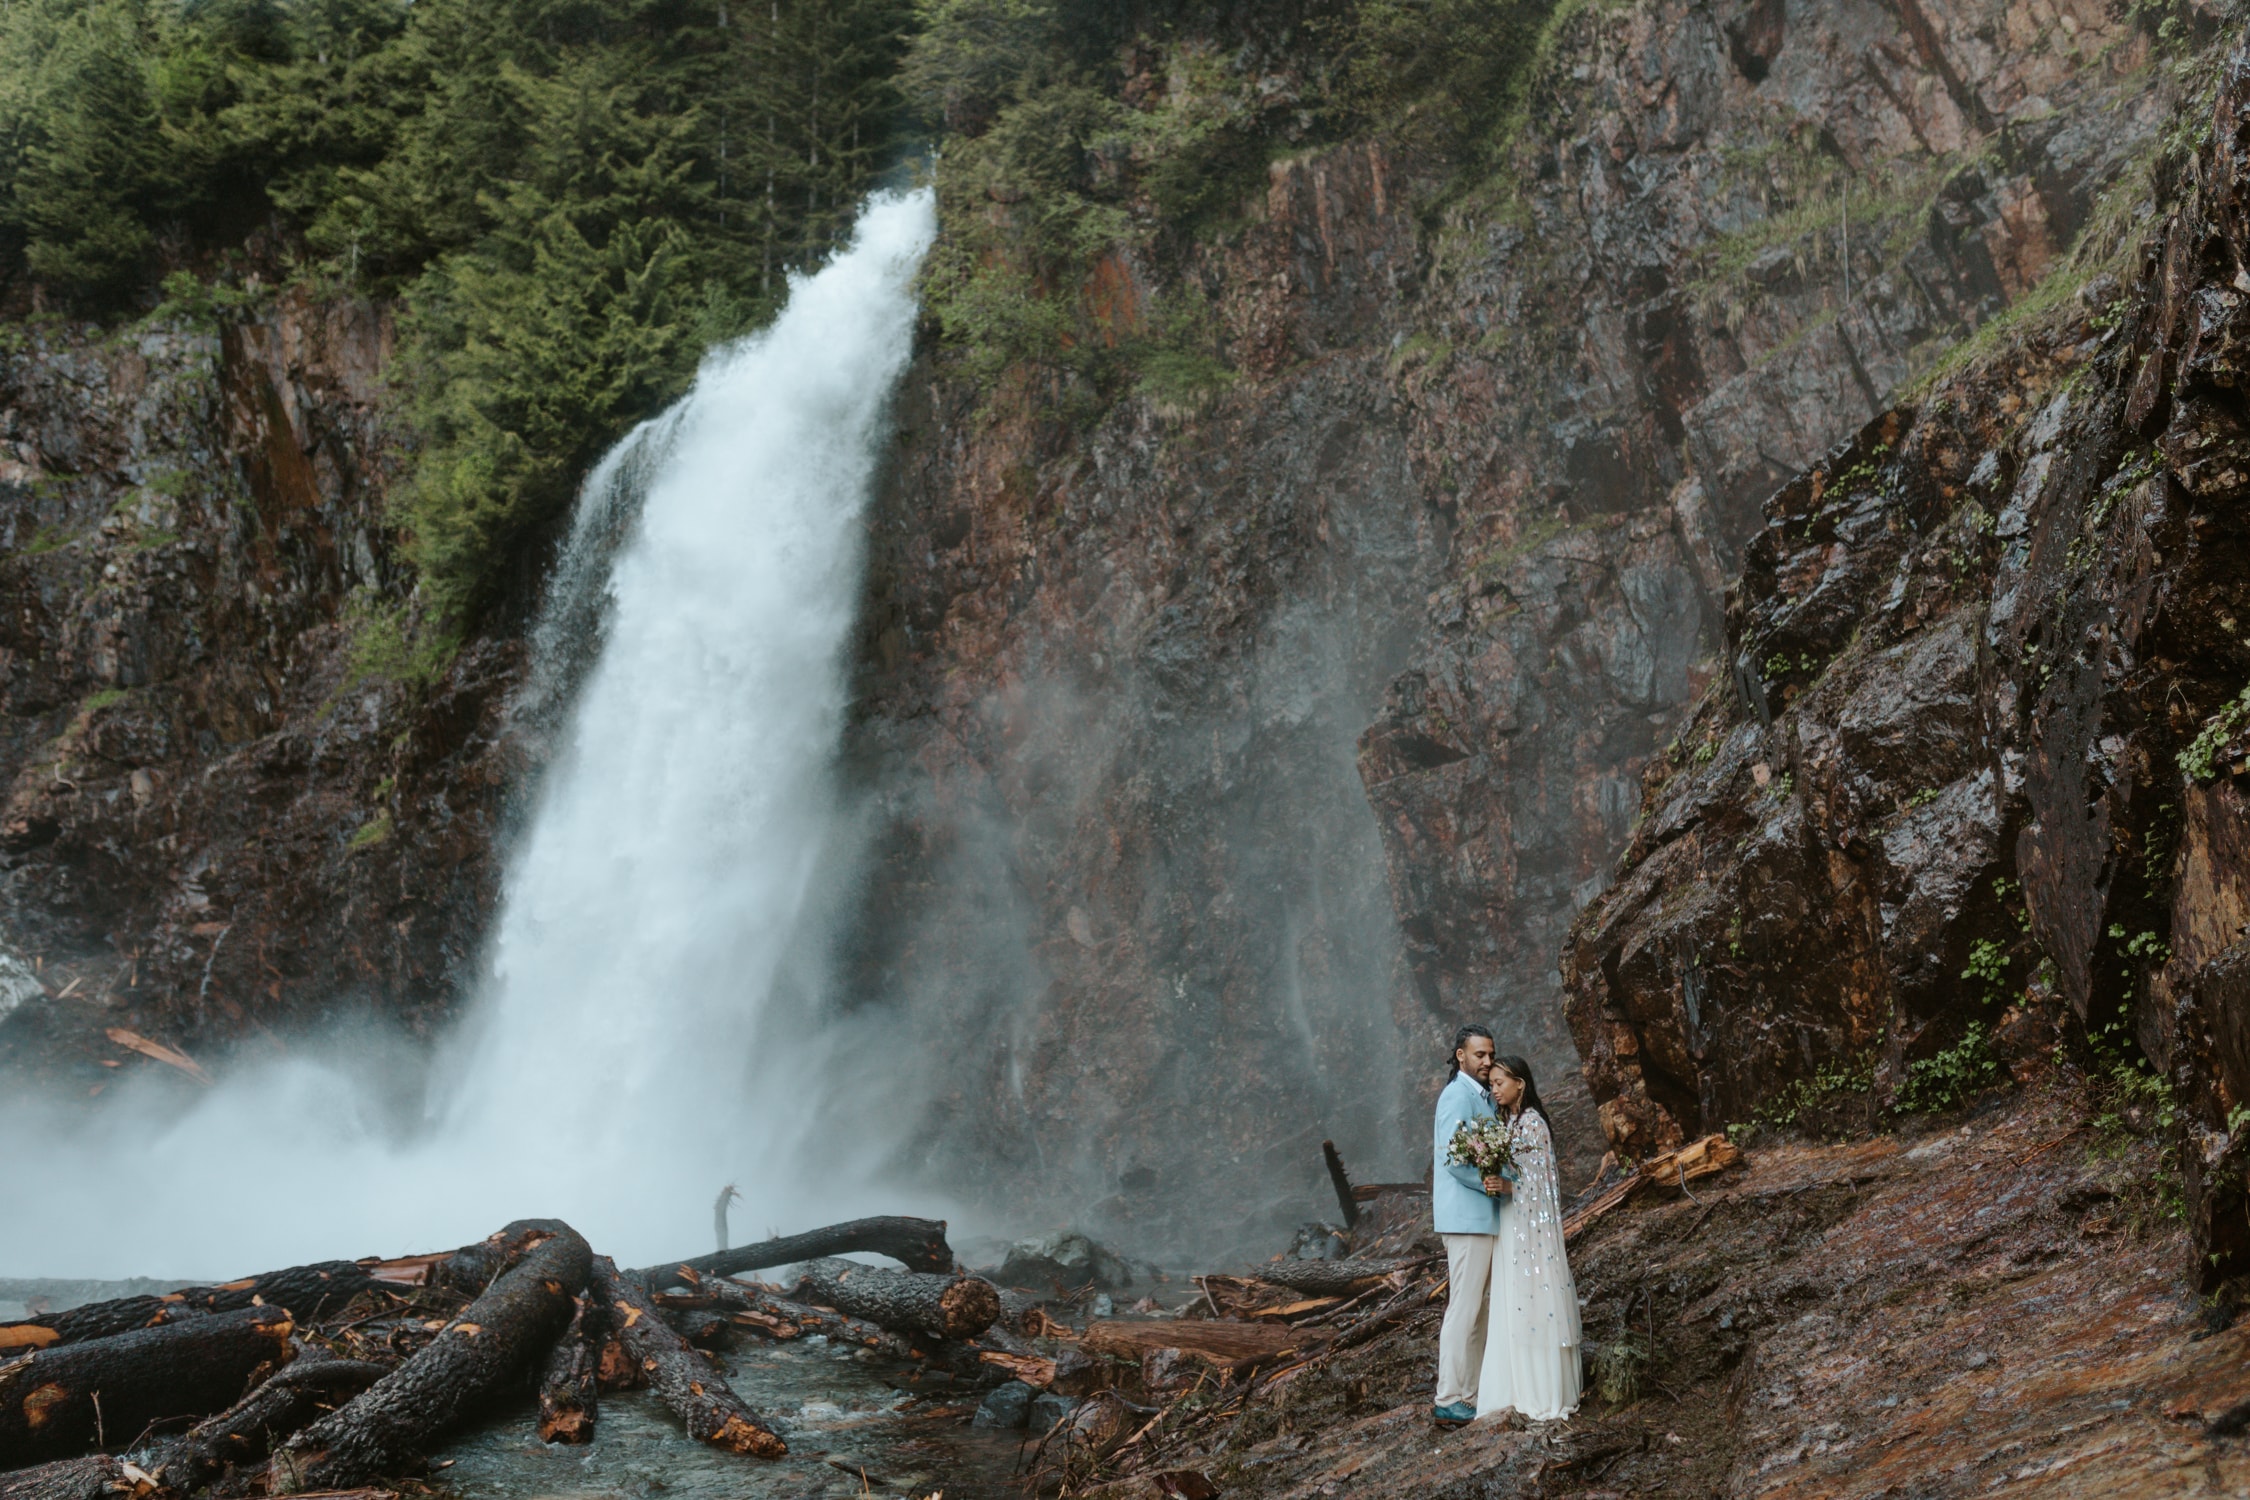 A bride and groom hugging each other next to Franklin Falls in Washington.